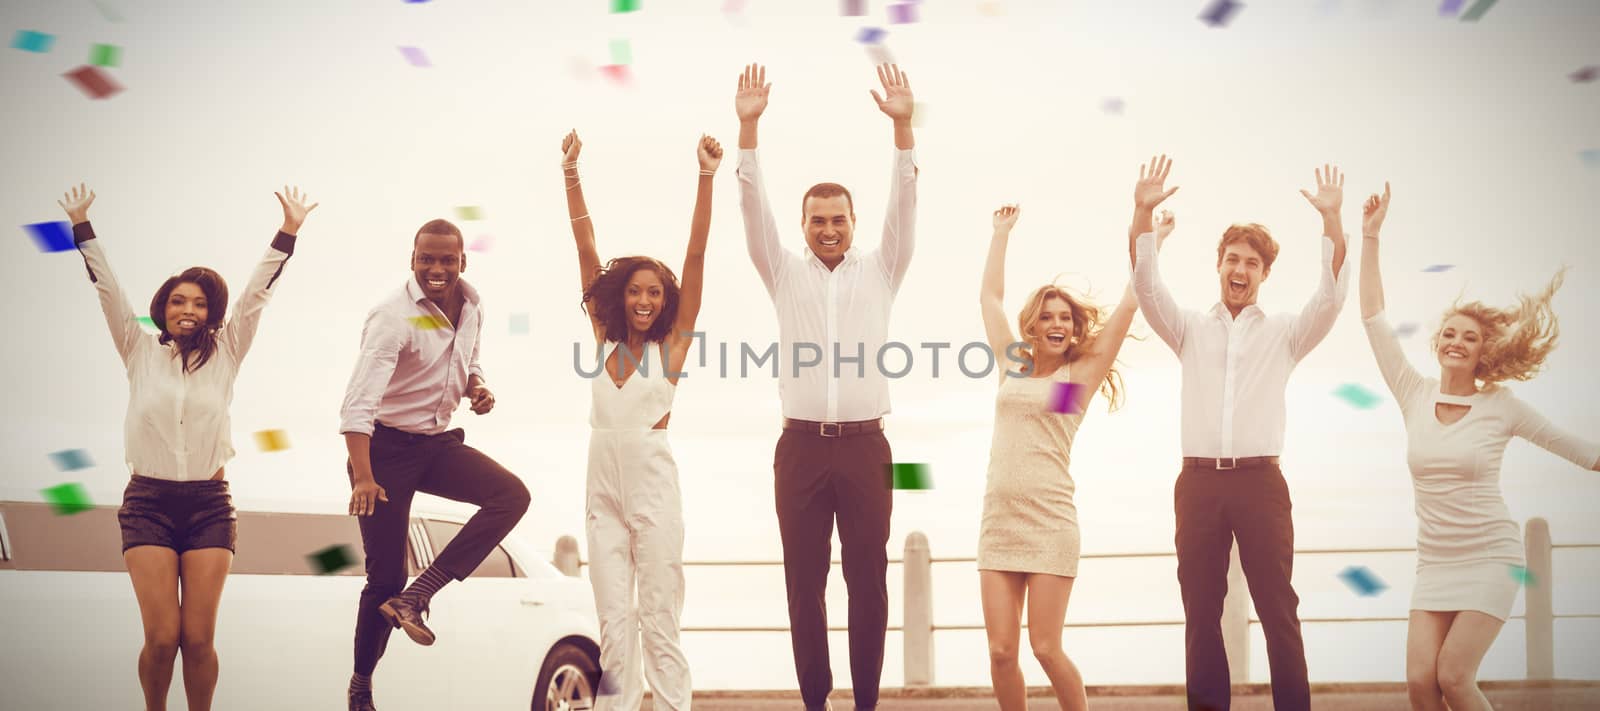 Composite image of well dressed people jumping next to limousine by Wavebreakmedia